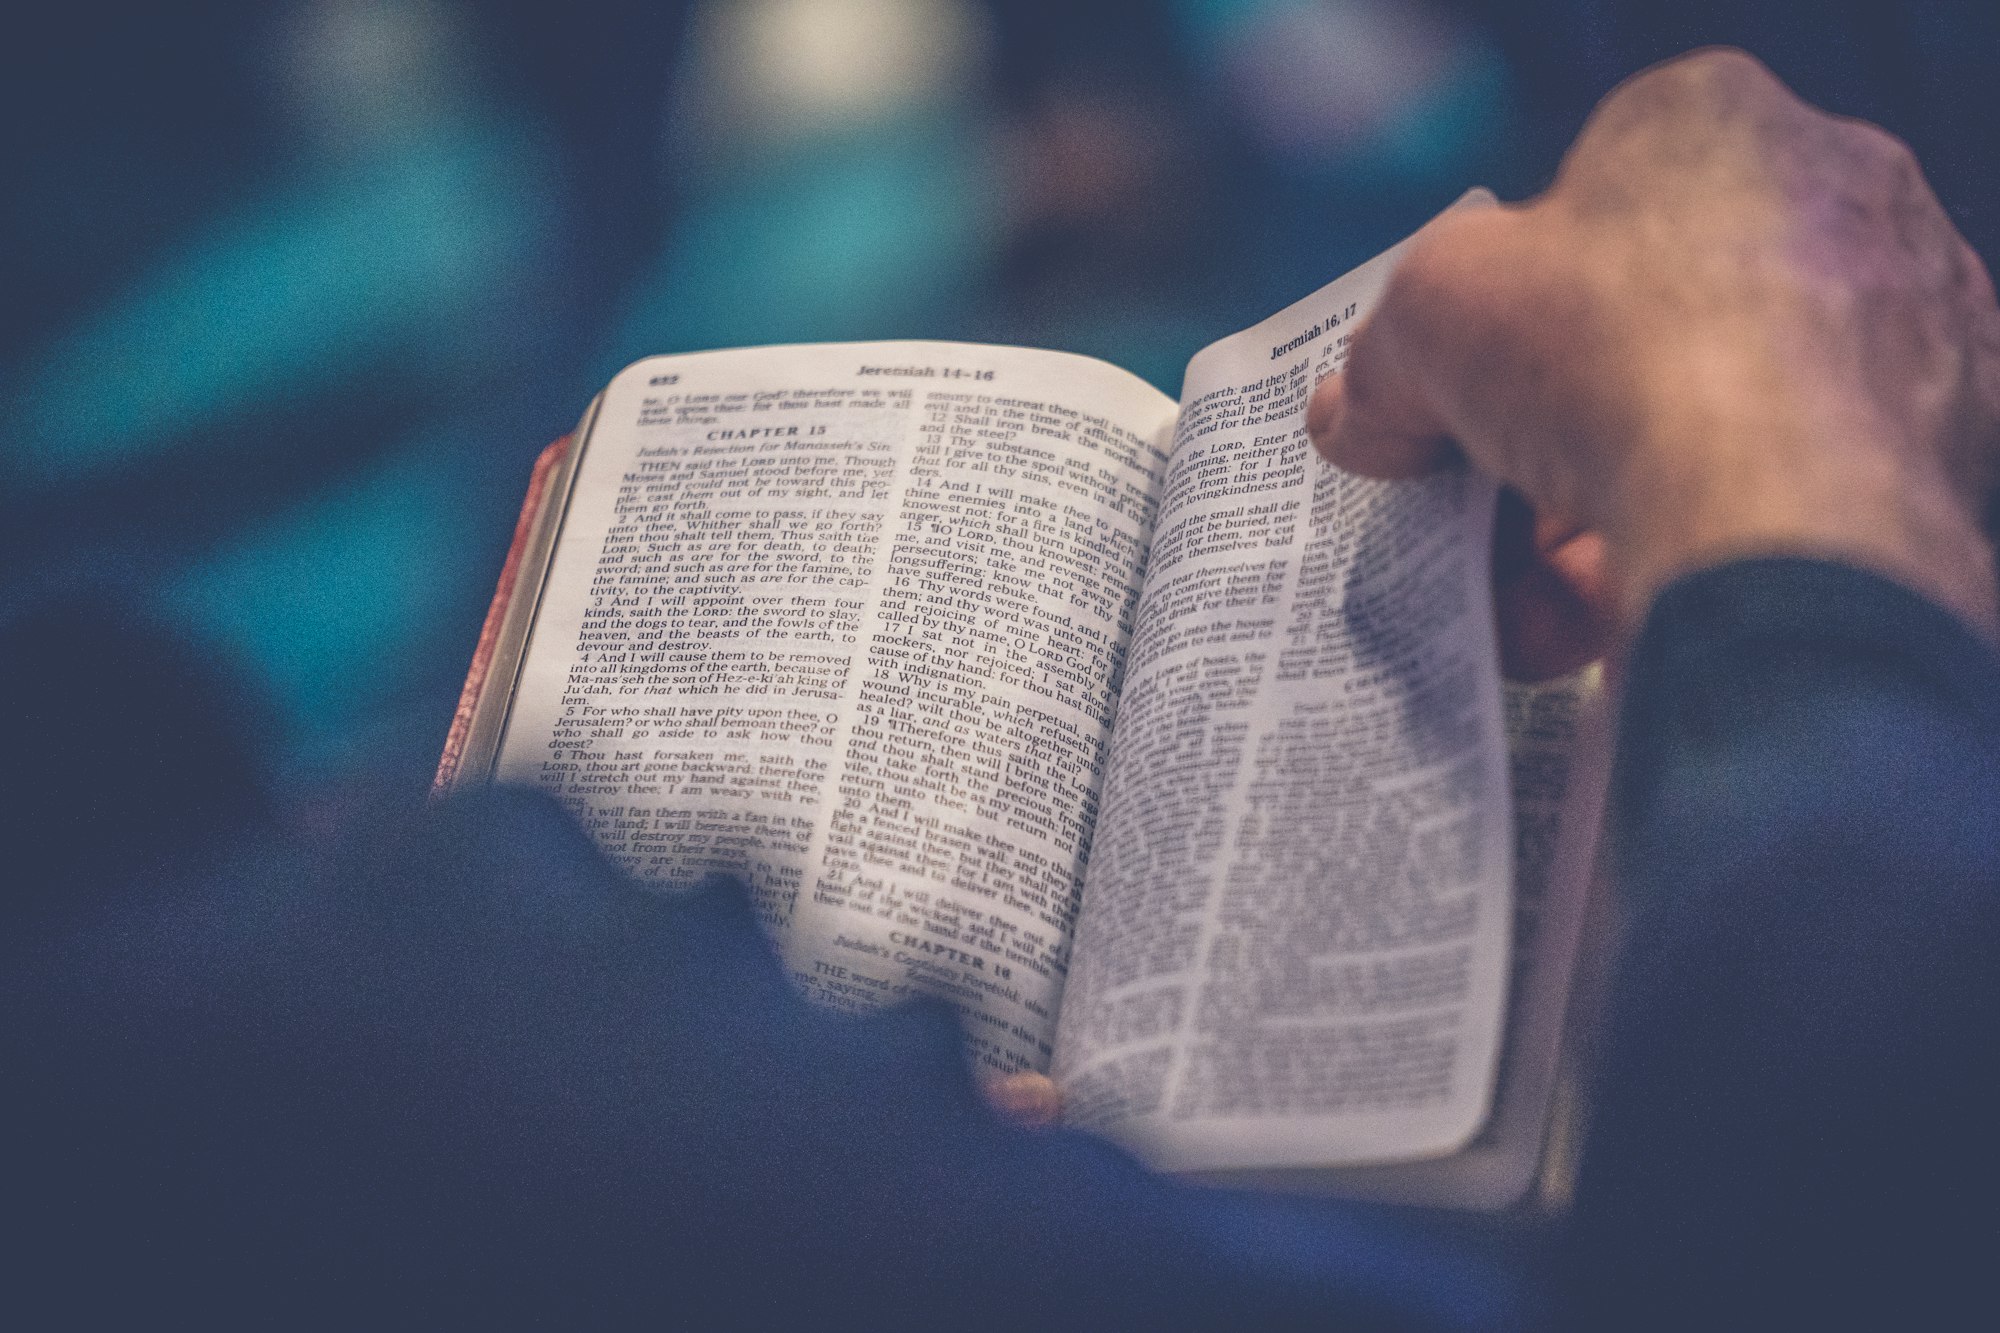 How Many Books Are There In The Standard Bible?